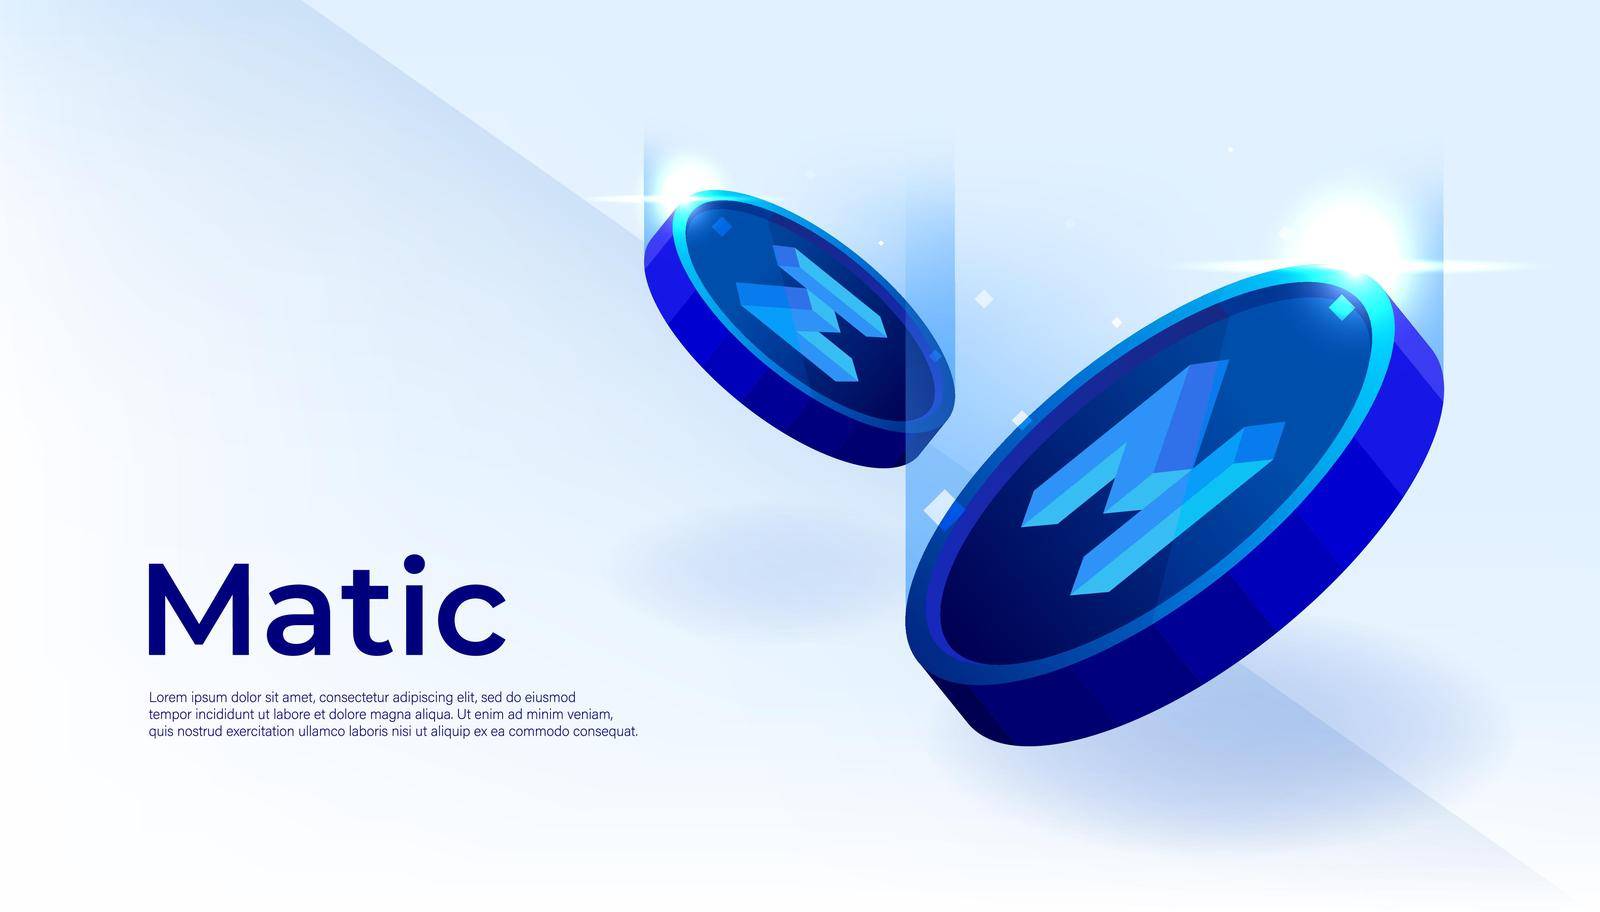 Polygon (MATIC) banner. MATIC coin cryptocurrency concept banner background. by windawake